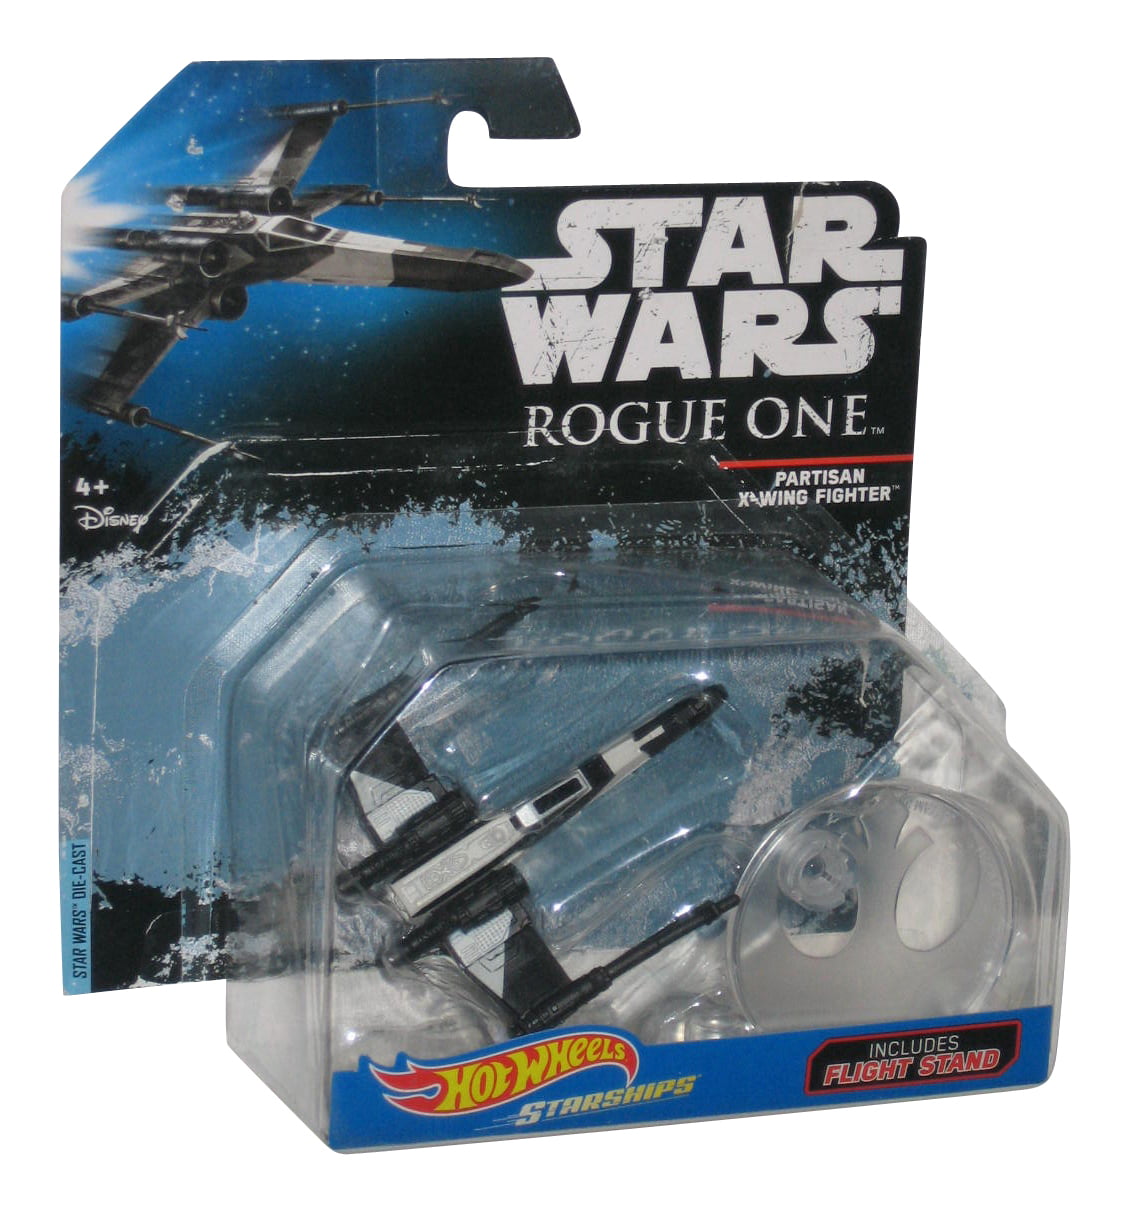 Star Wars Rogue One Hot Wheels Carships Partisan X Wing Fighter New Mib 2016 Toys Hobbies Expertindiatours Cars Trucks Vans - roblox rogue how to get rc fast